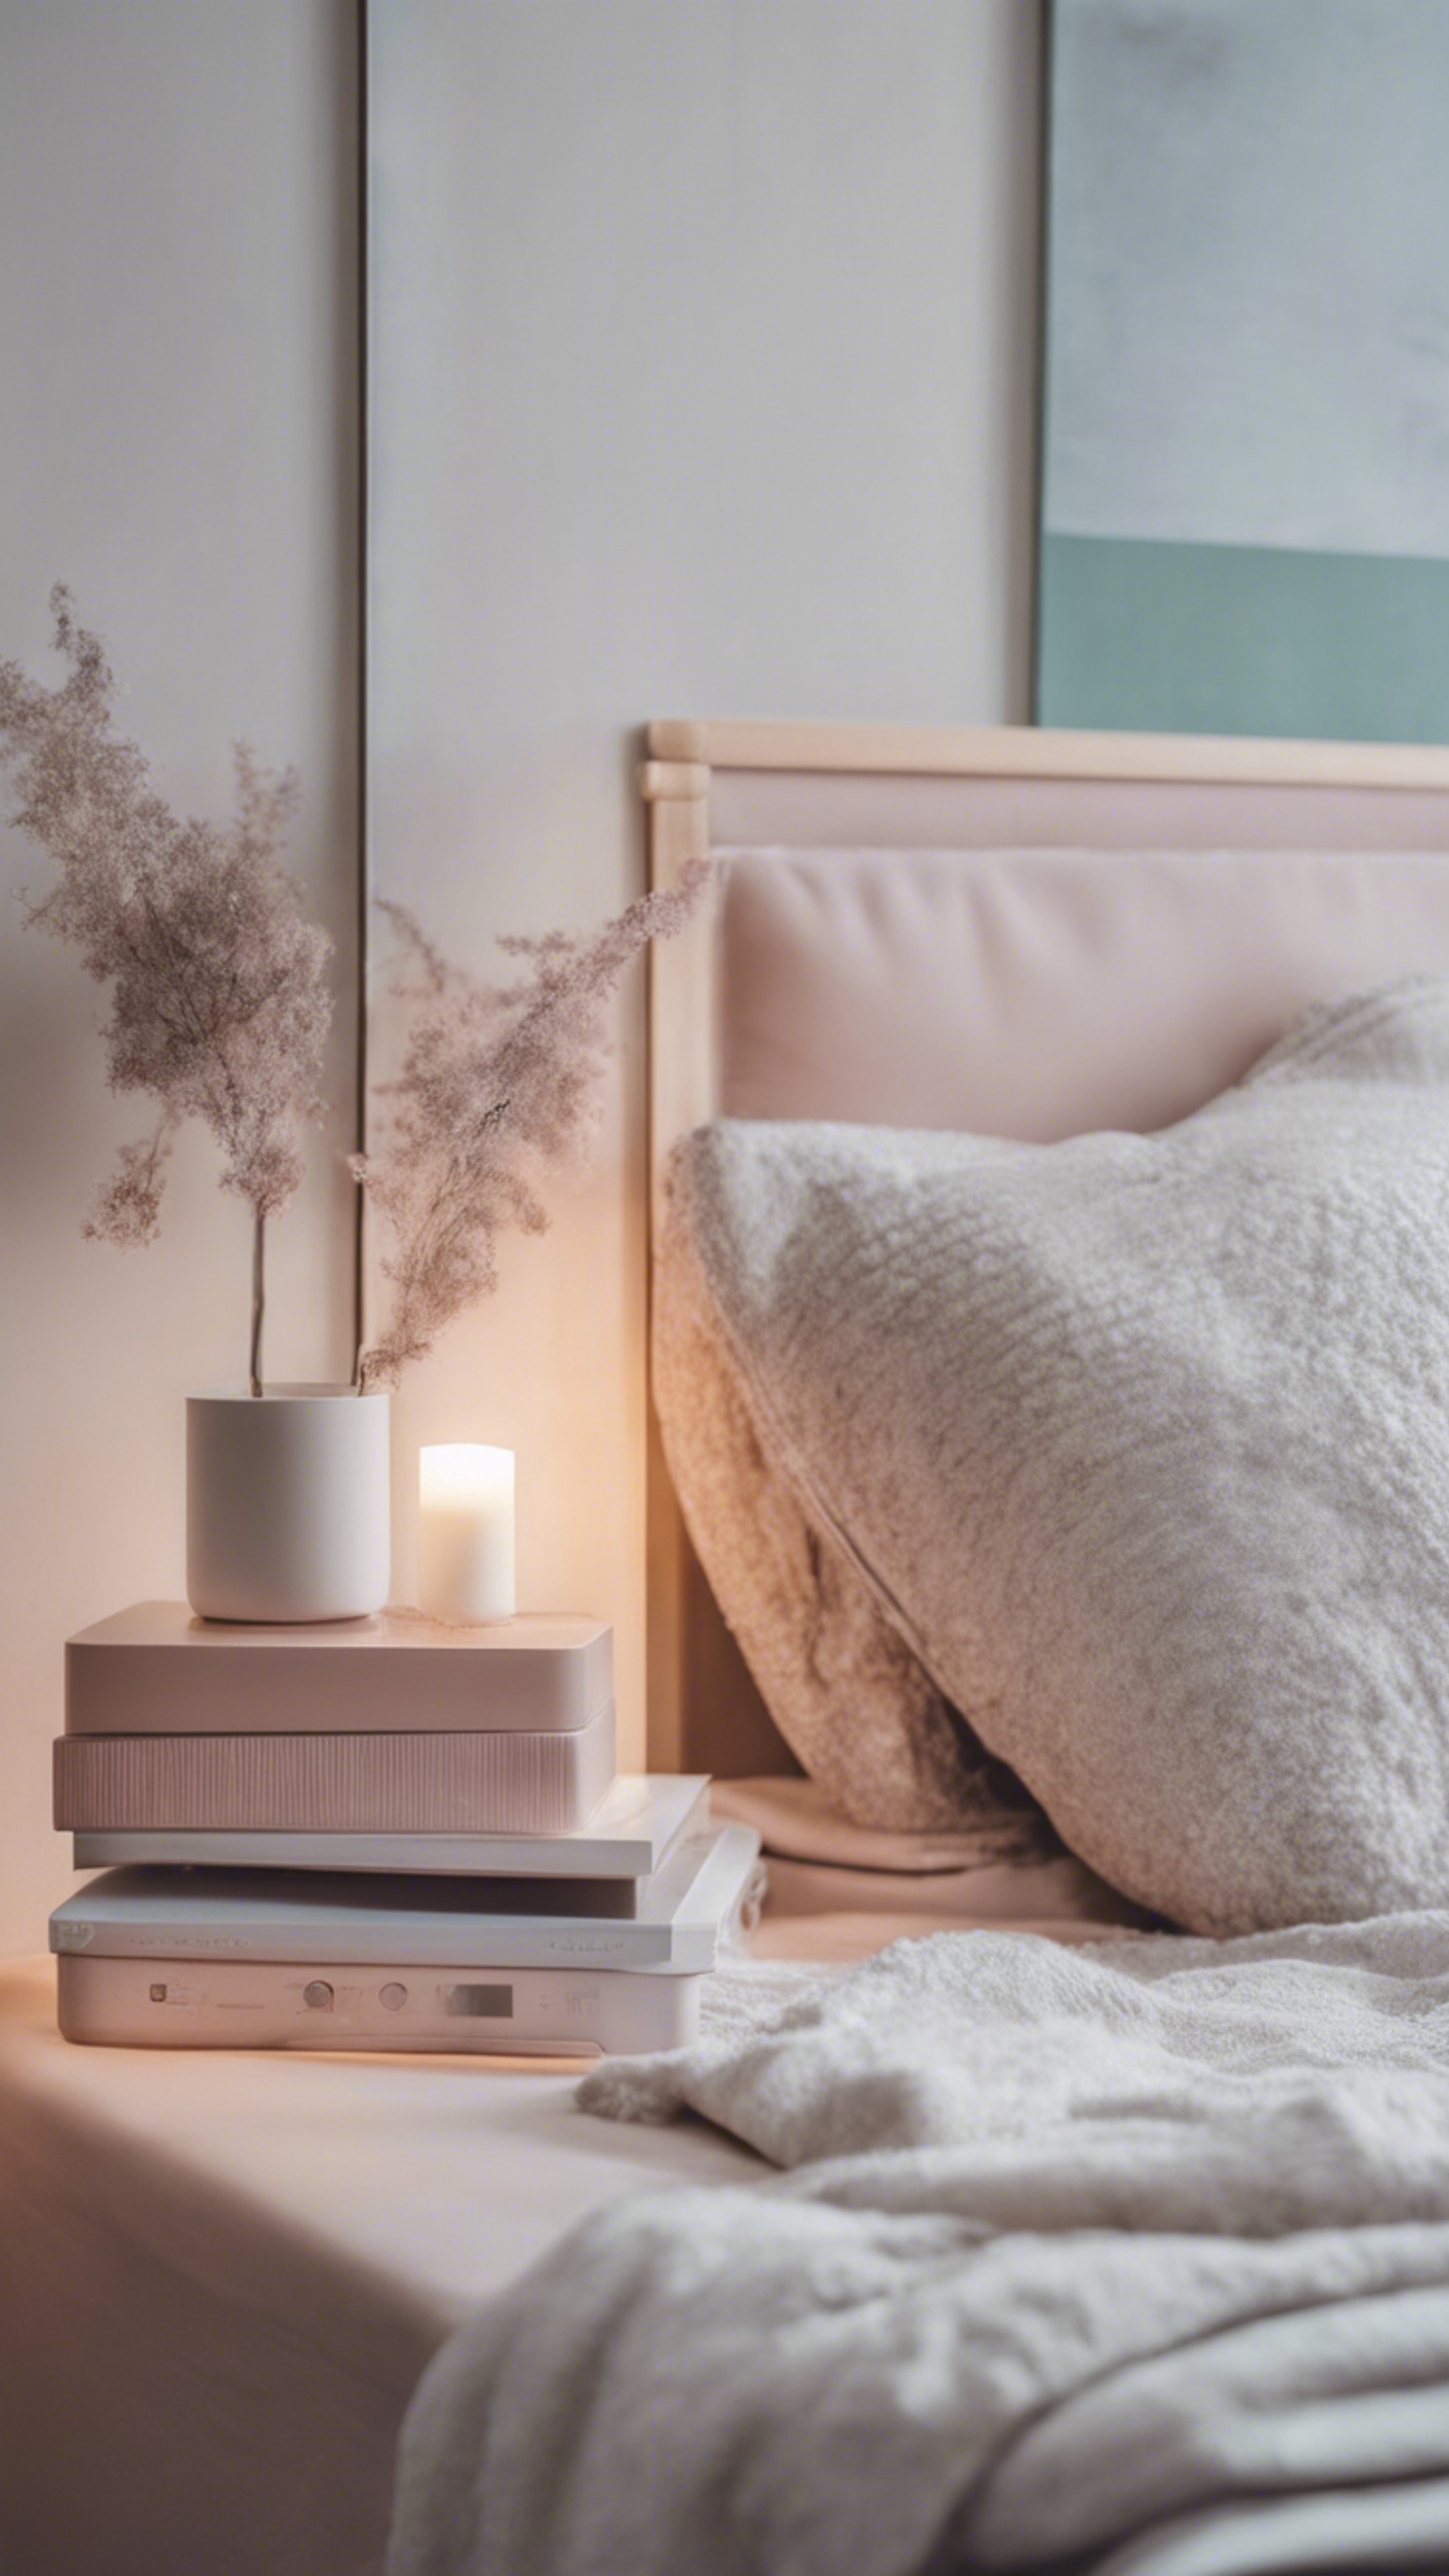 A modern minimalist bedroom in pastel hues with cozy blankets and a stylish bedside table. טפט[e12df14007a0419d89d8]